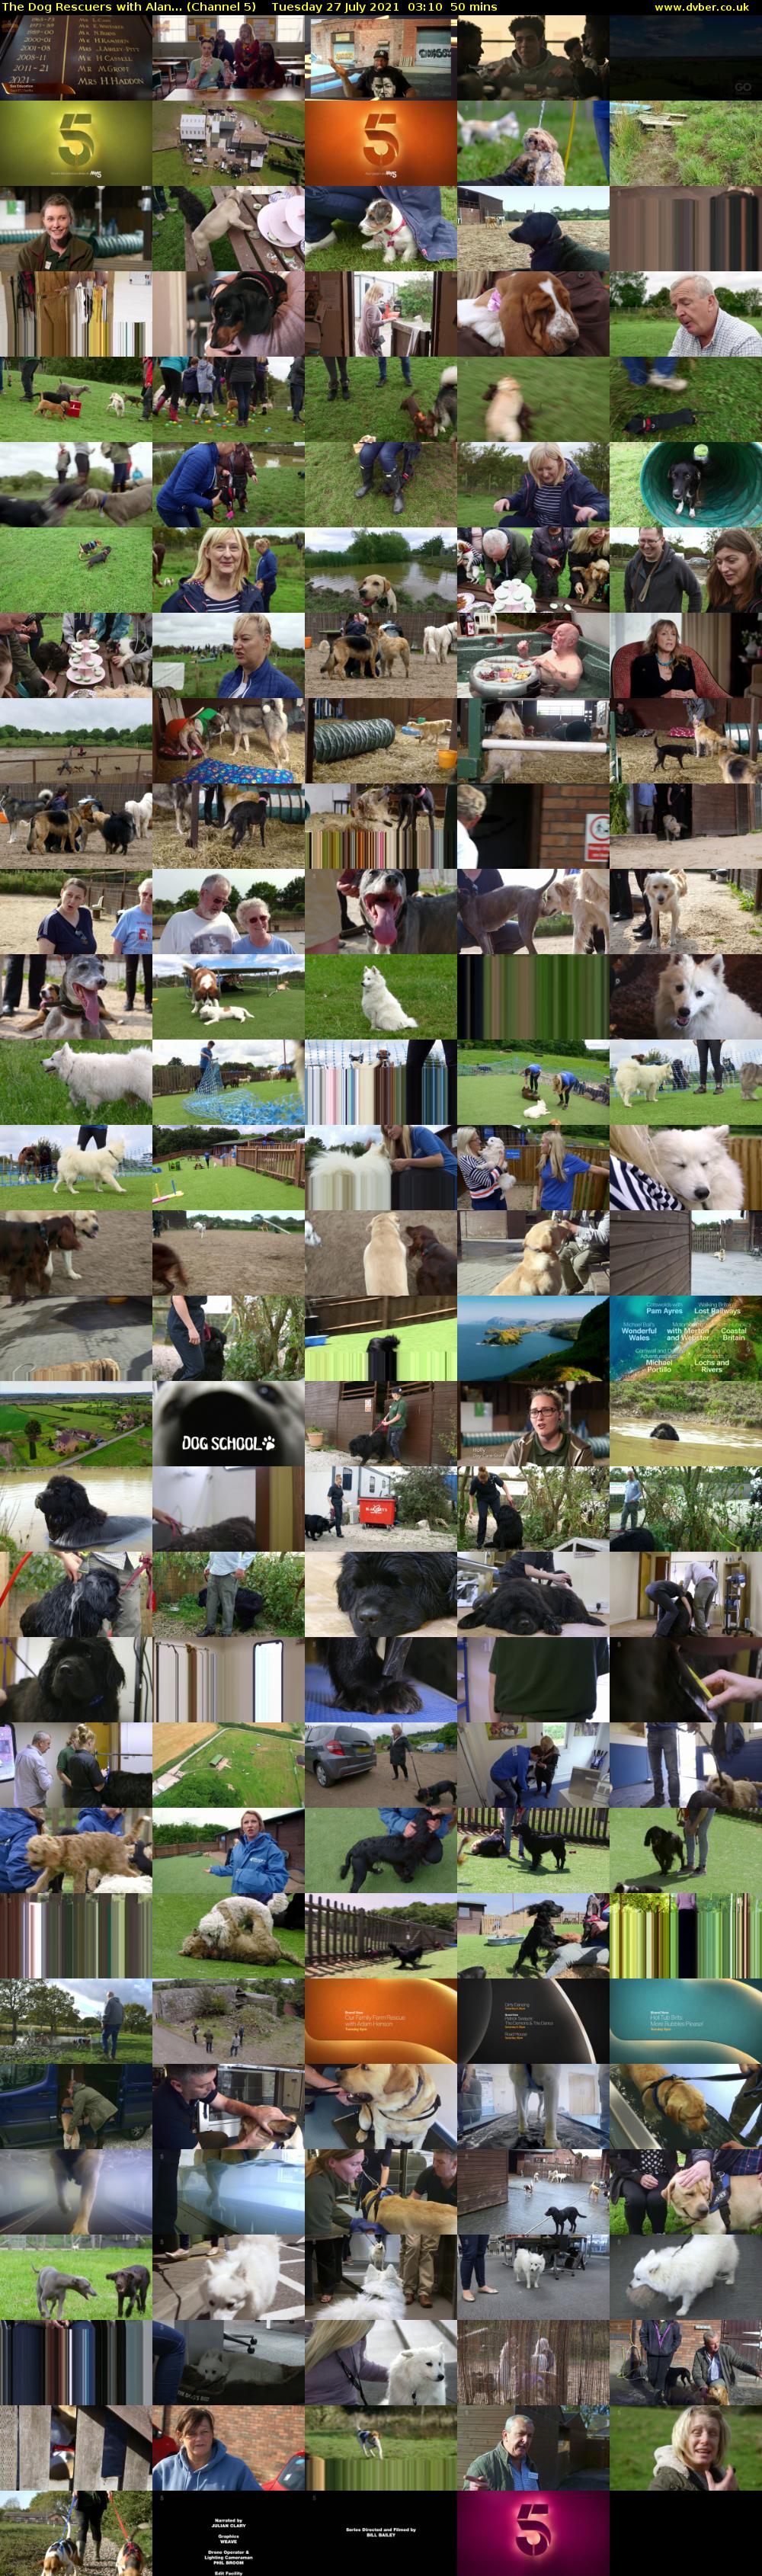 The Dog Rescuers with Alan... (Channel 5) Tuesday 27 July 2021 03:10 - 04:00